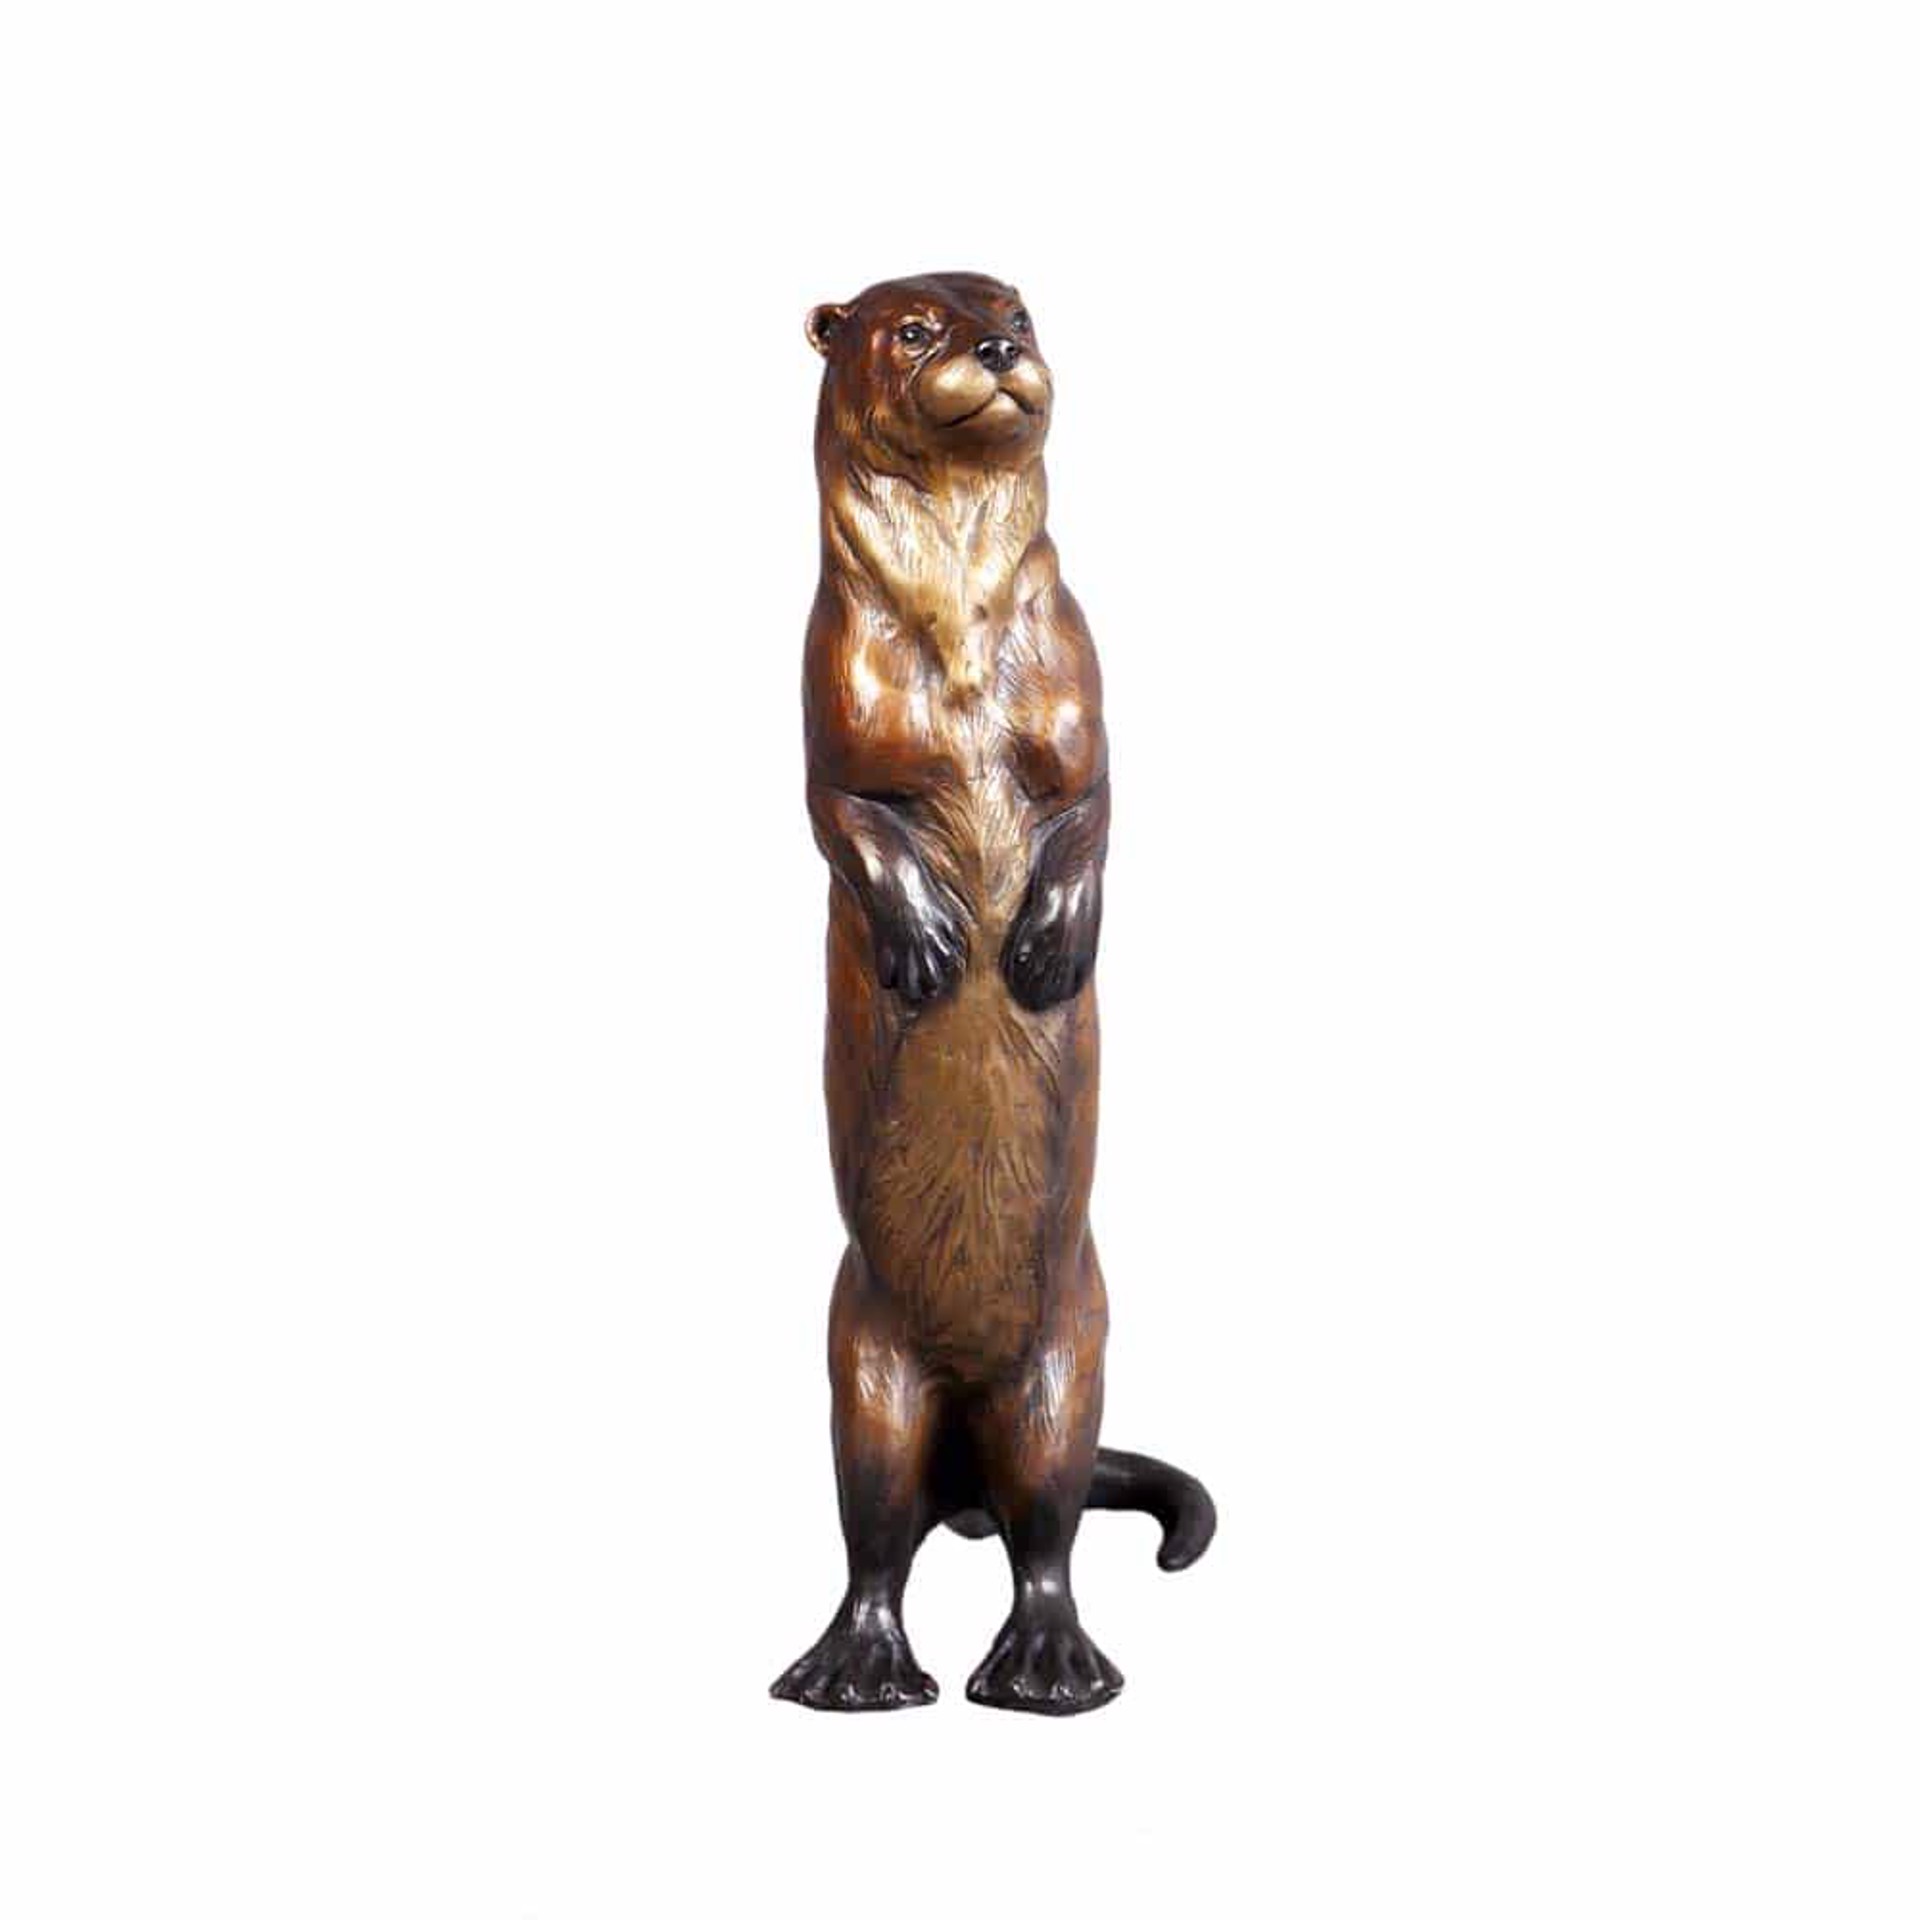 Otter Mini Original Bronze Sculpture by Rip and Alison Caswell, Contemporary Fine Art, Modern Wildlife Art, Available At Gallery Wild